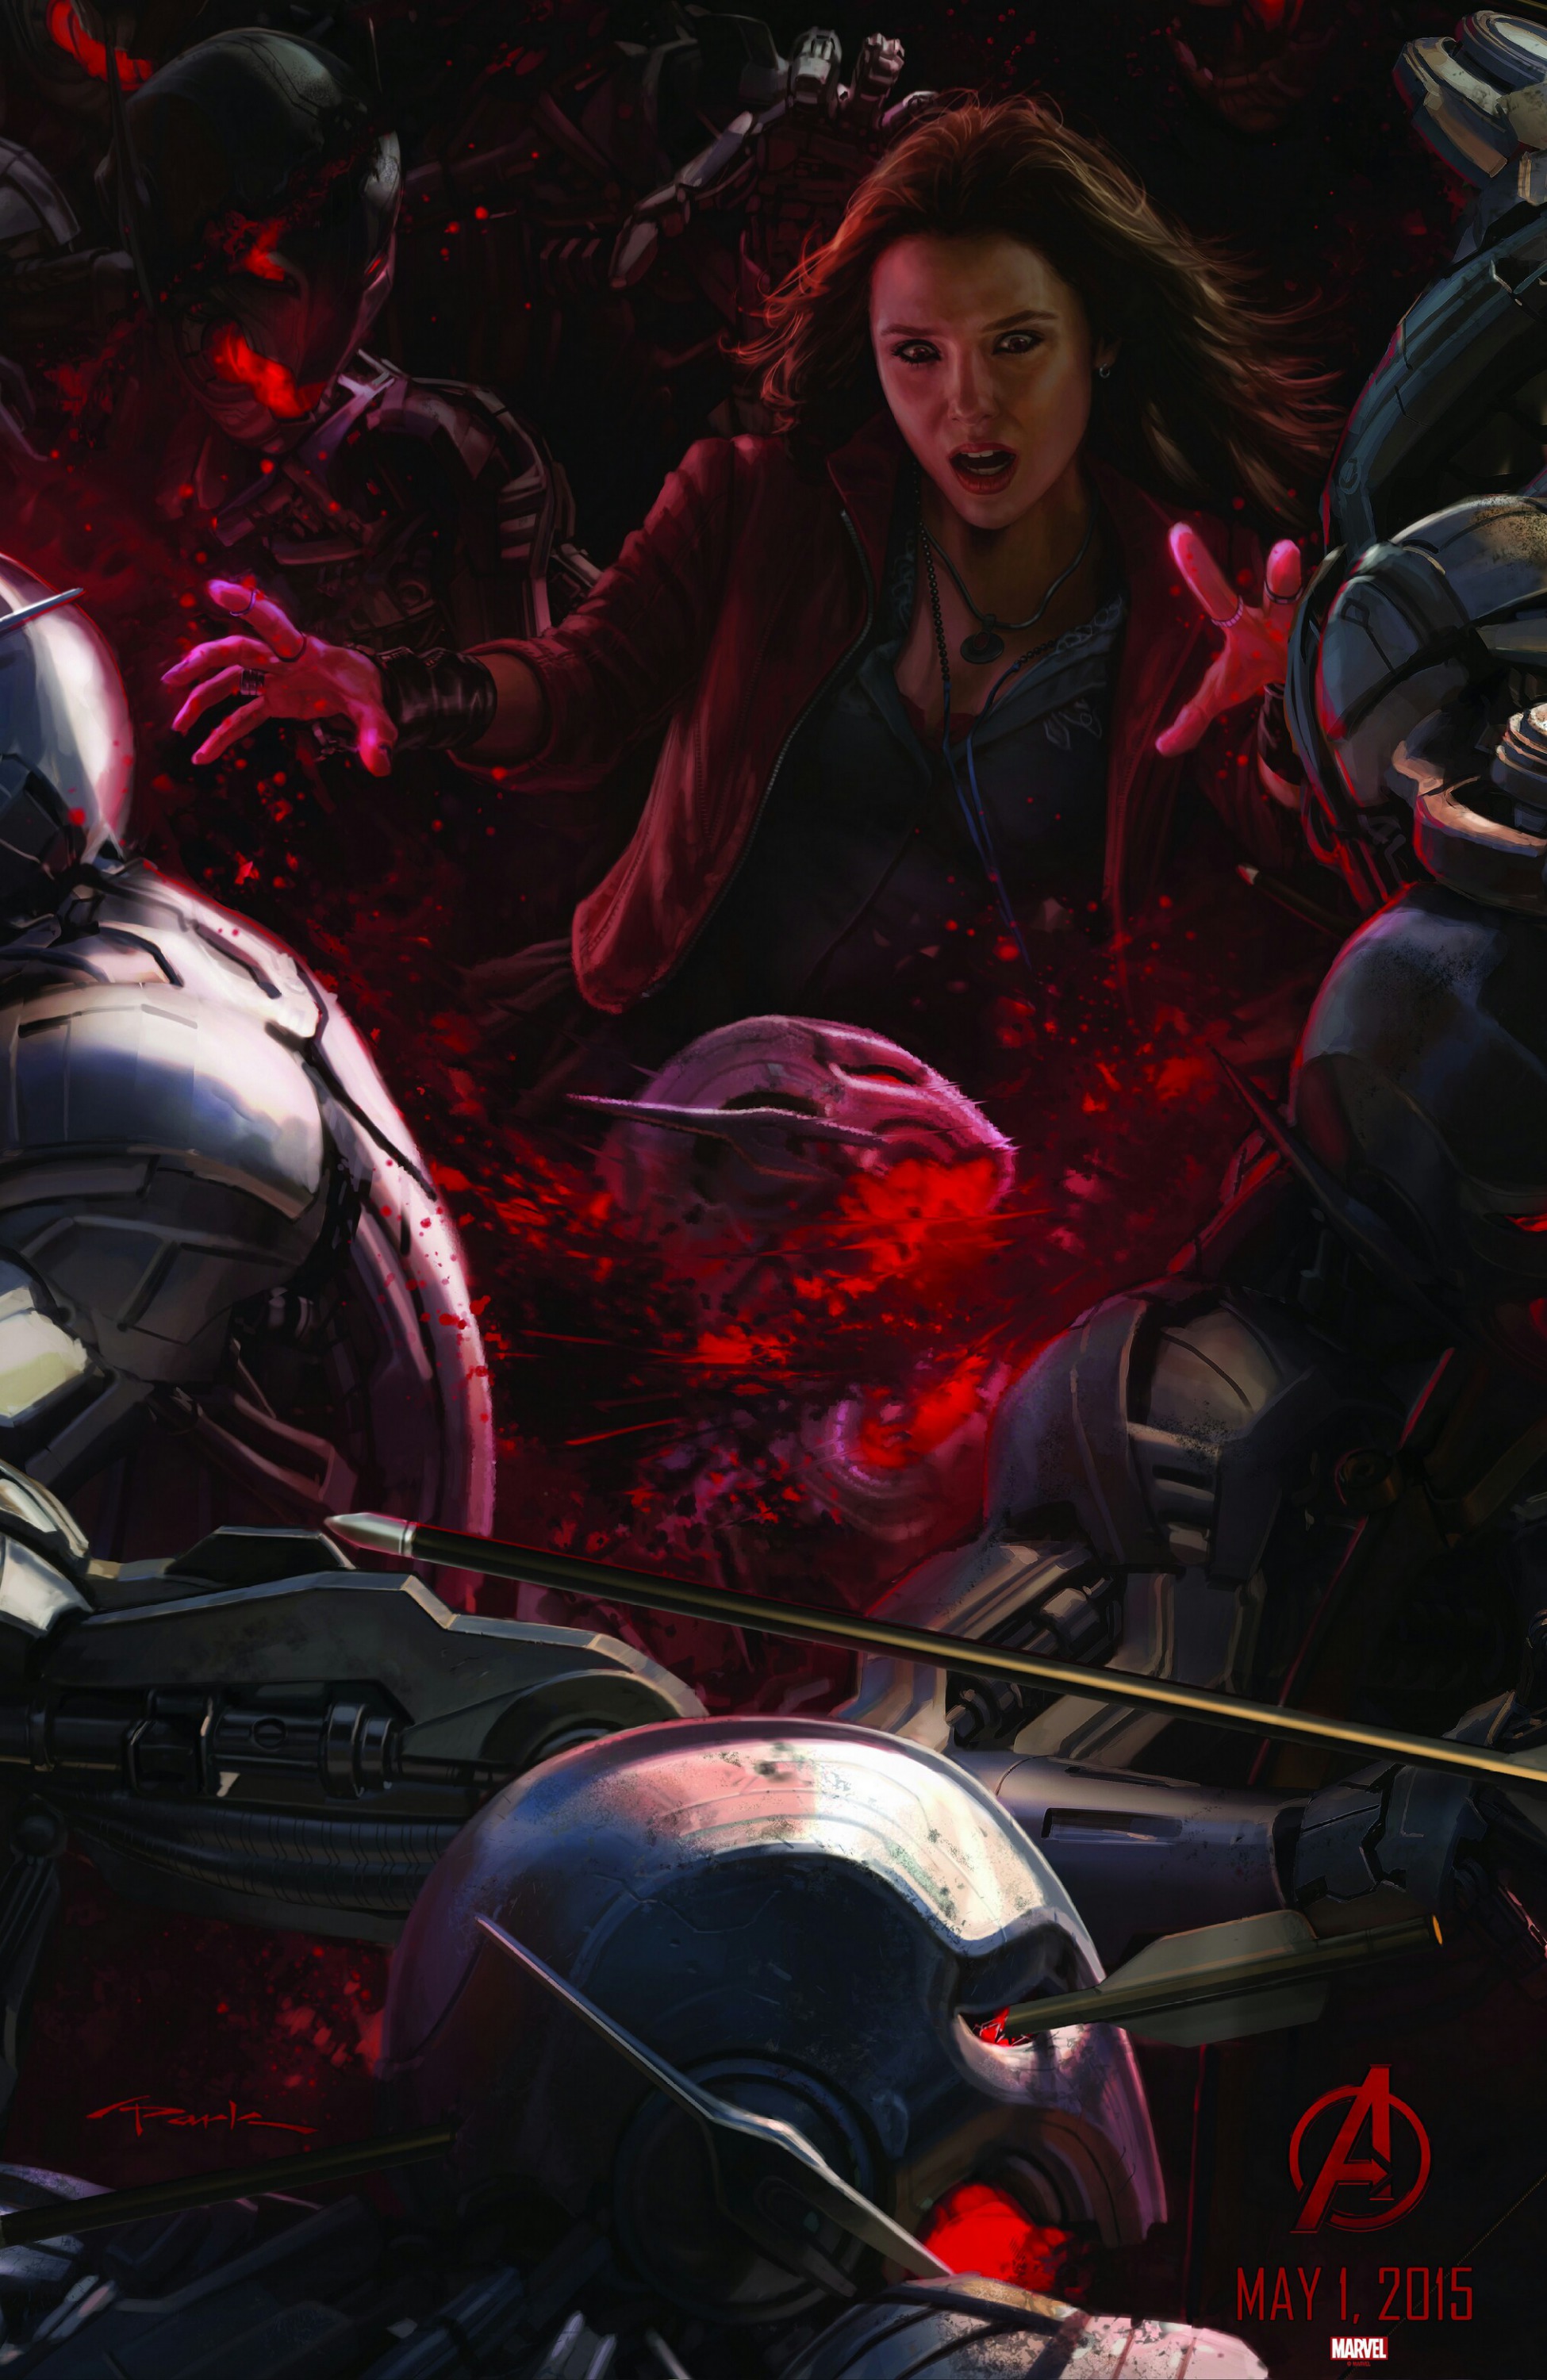 Mega Sized Movie Poster Image for Avengers: Age of Ultron (#8 of 36)